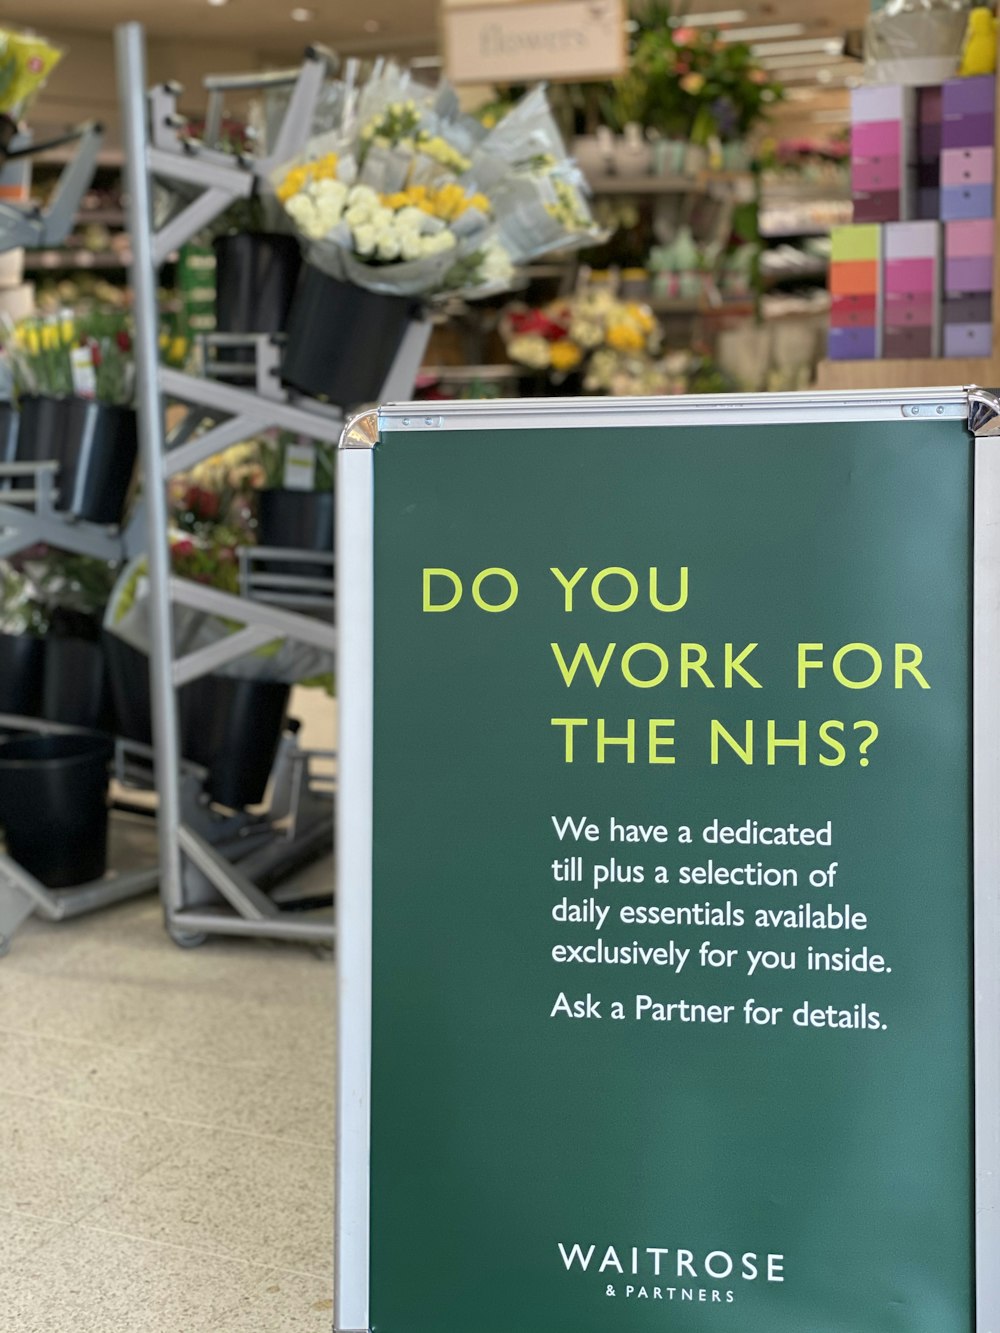 a sign that says do you work for the nhs?